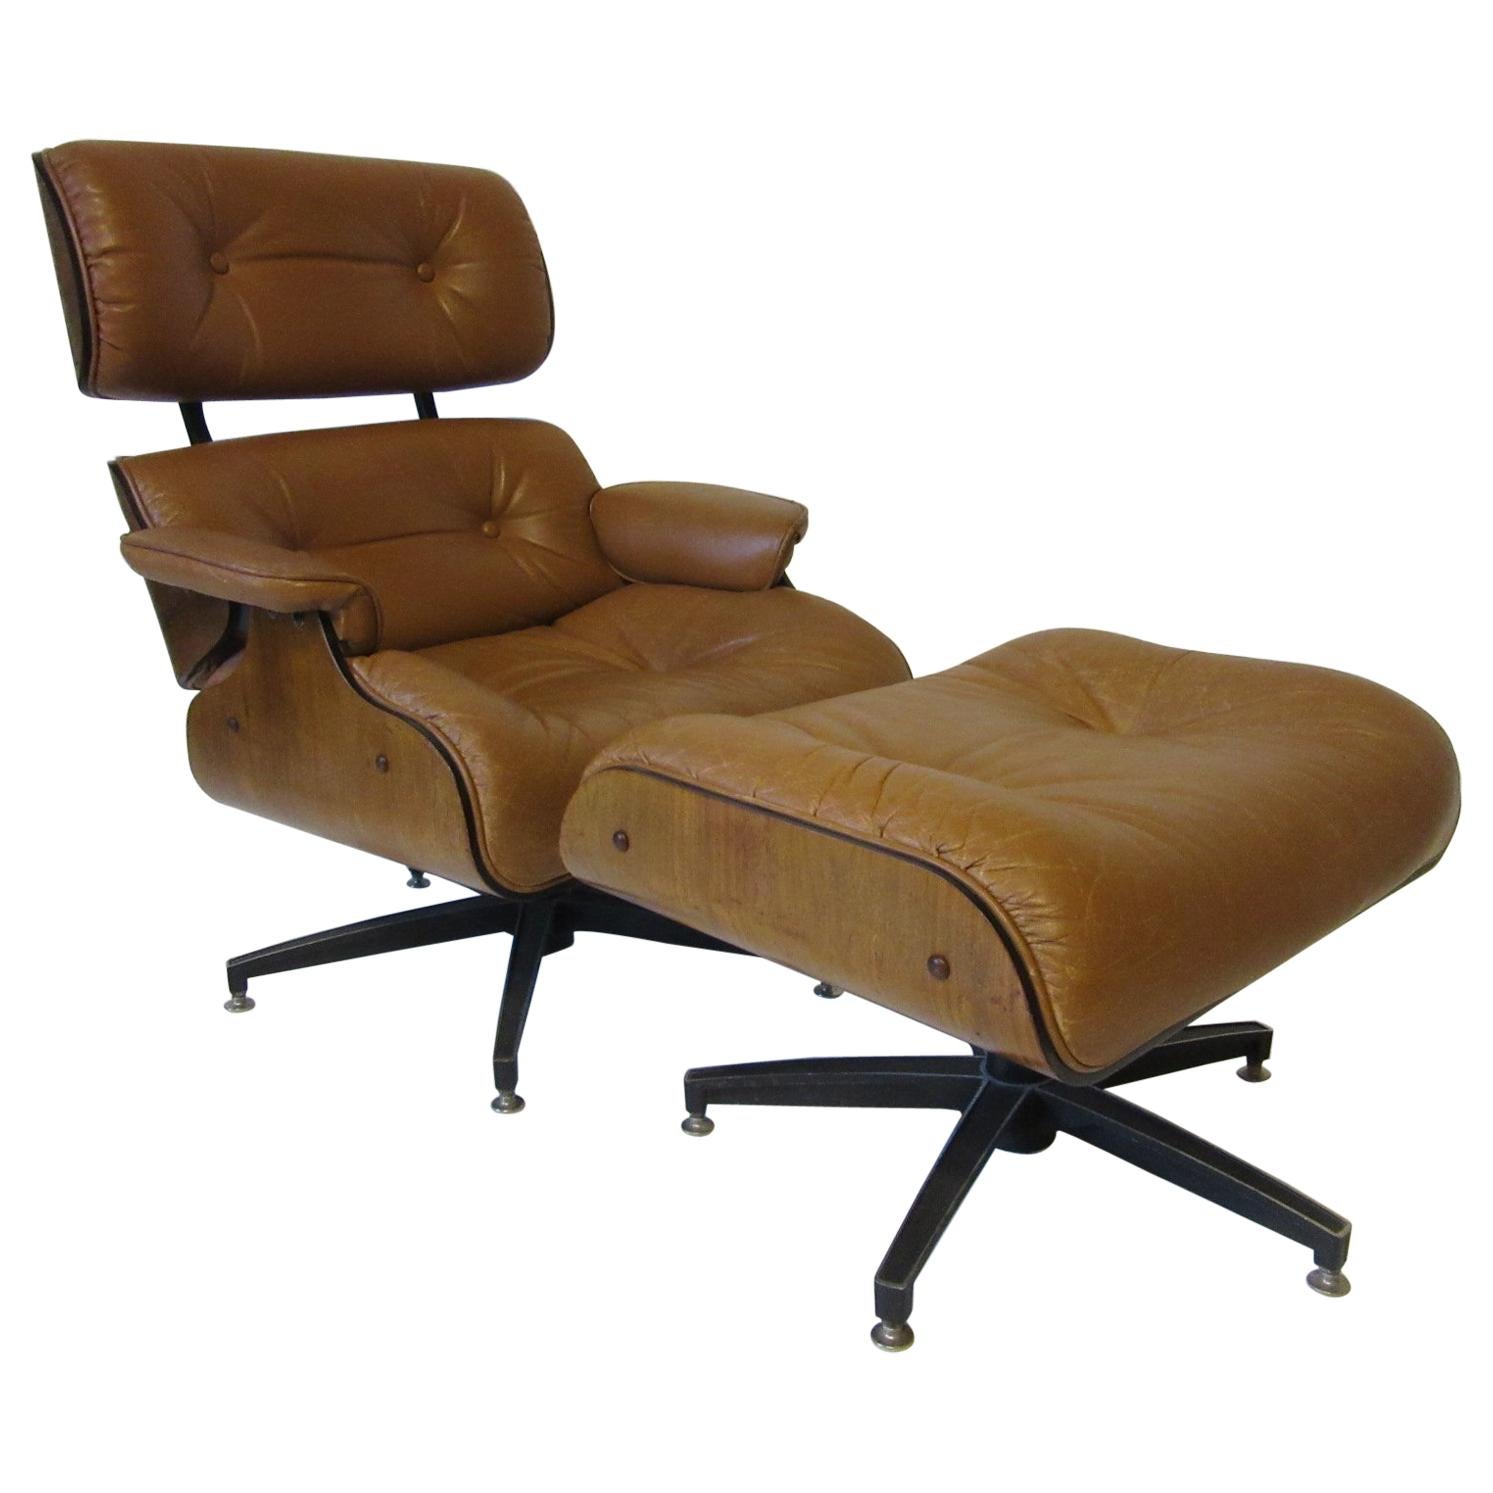 Selig Leather Lounge Chair or Ottoman in the style of Eames or Herman Miller